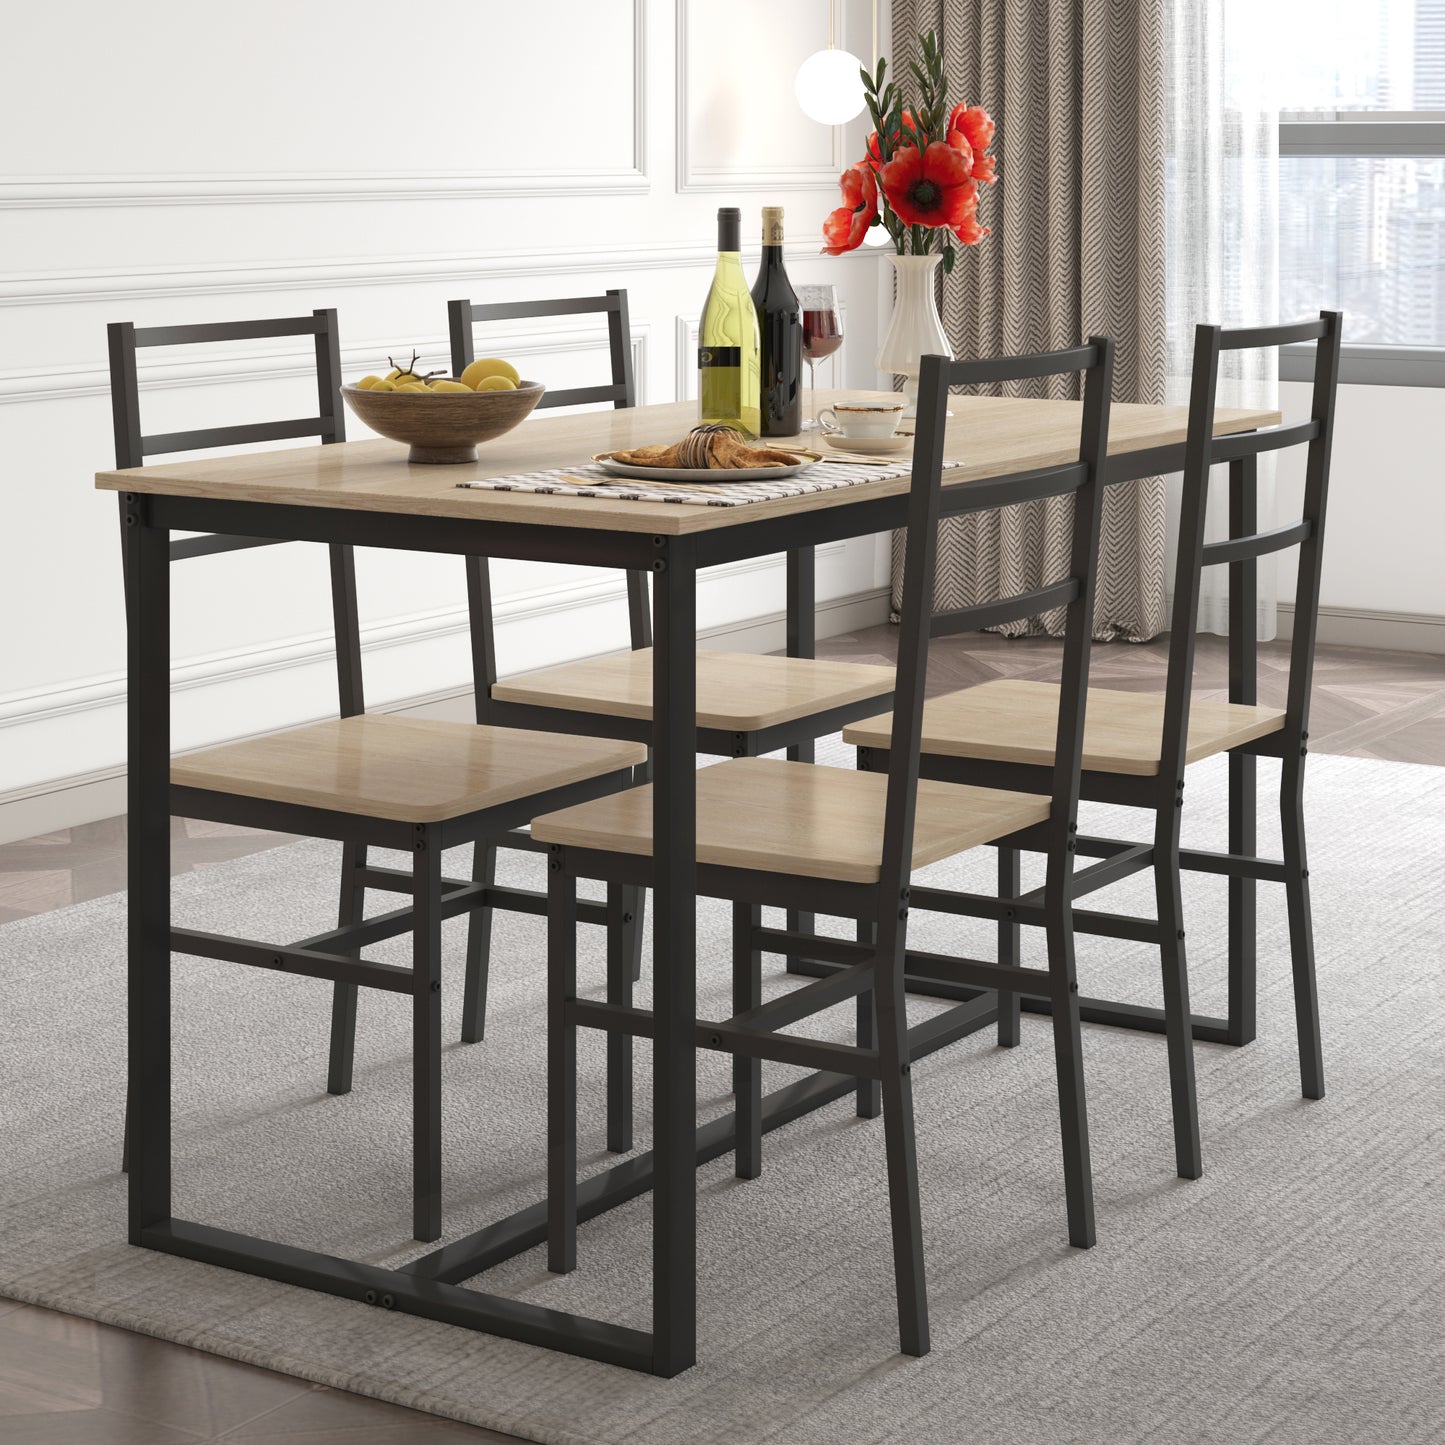 SYNGAR 5 Piece Dining Set, Dining Table Set for 4, Modern Dining Room Table Set with 4 Chairs, Table and Chairs Set with Wooden Tabletop and Metal Frame, for Kitchen, Living Room, Restaurant, D6112